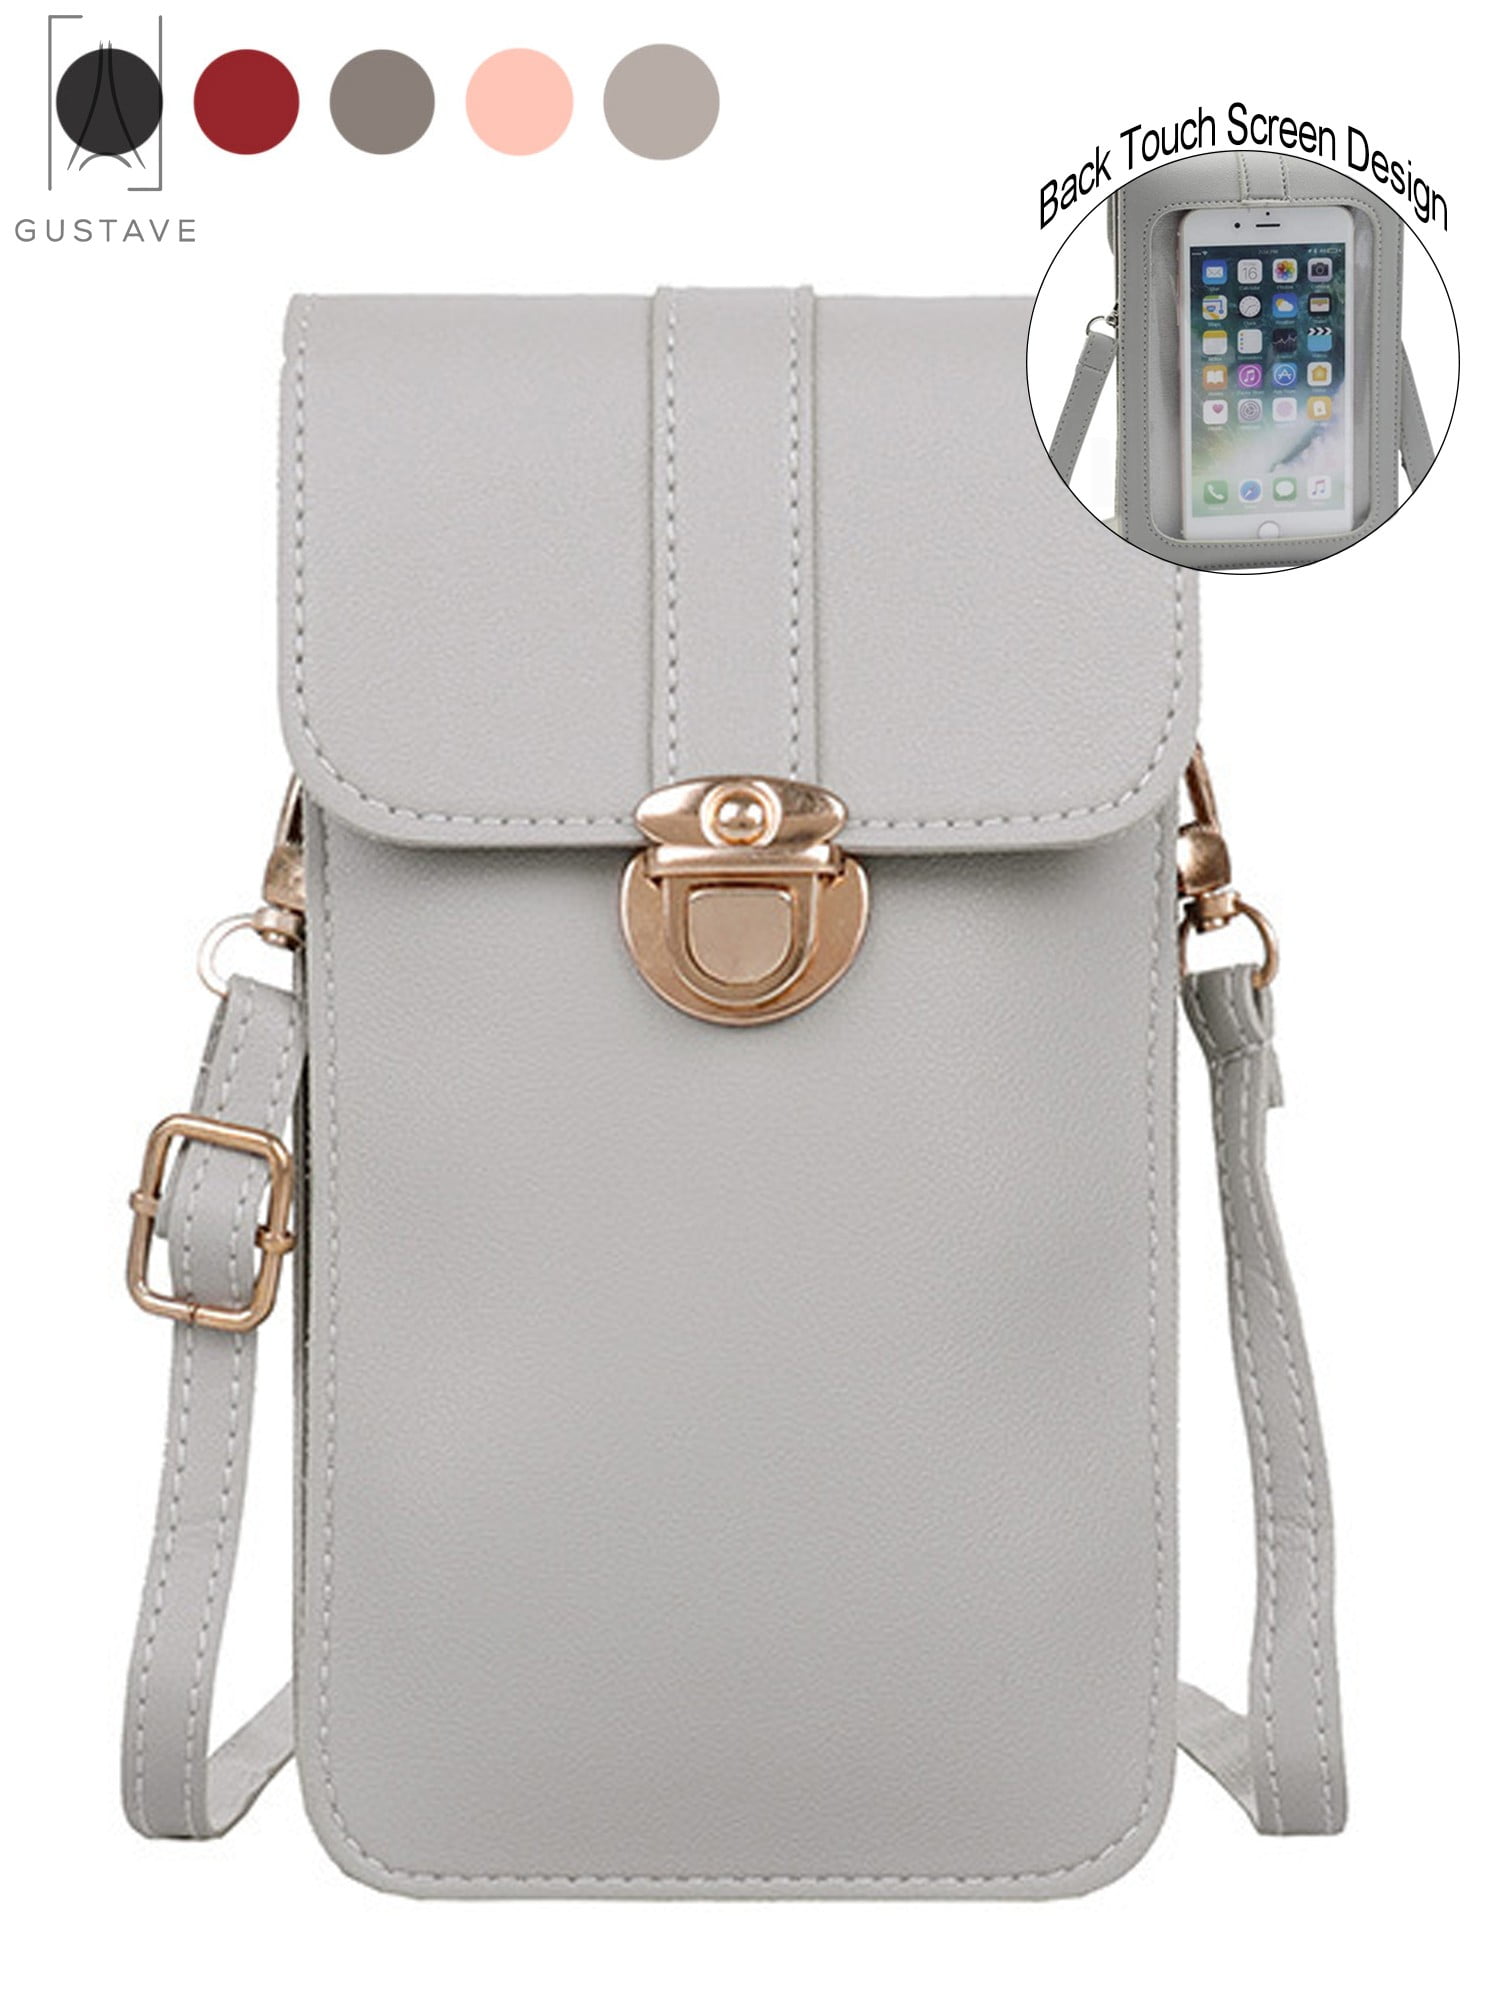 Gustave Touch Screen Cell Phone Purse PU Leather Mini Crossbody Bag Portable Phone Pouch Shoulder Bag For Iphone 11 For Samsung Gray 4a6aa1b0 0af7 4a18 8cce 2d32e02fc691.0a692fa3098560df48f30b0774cefb04